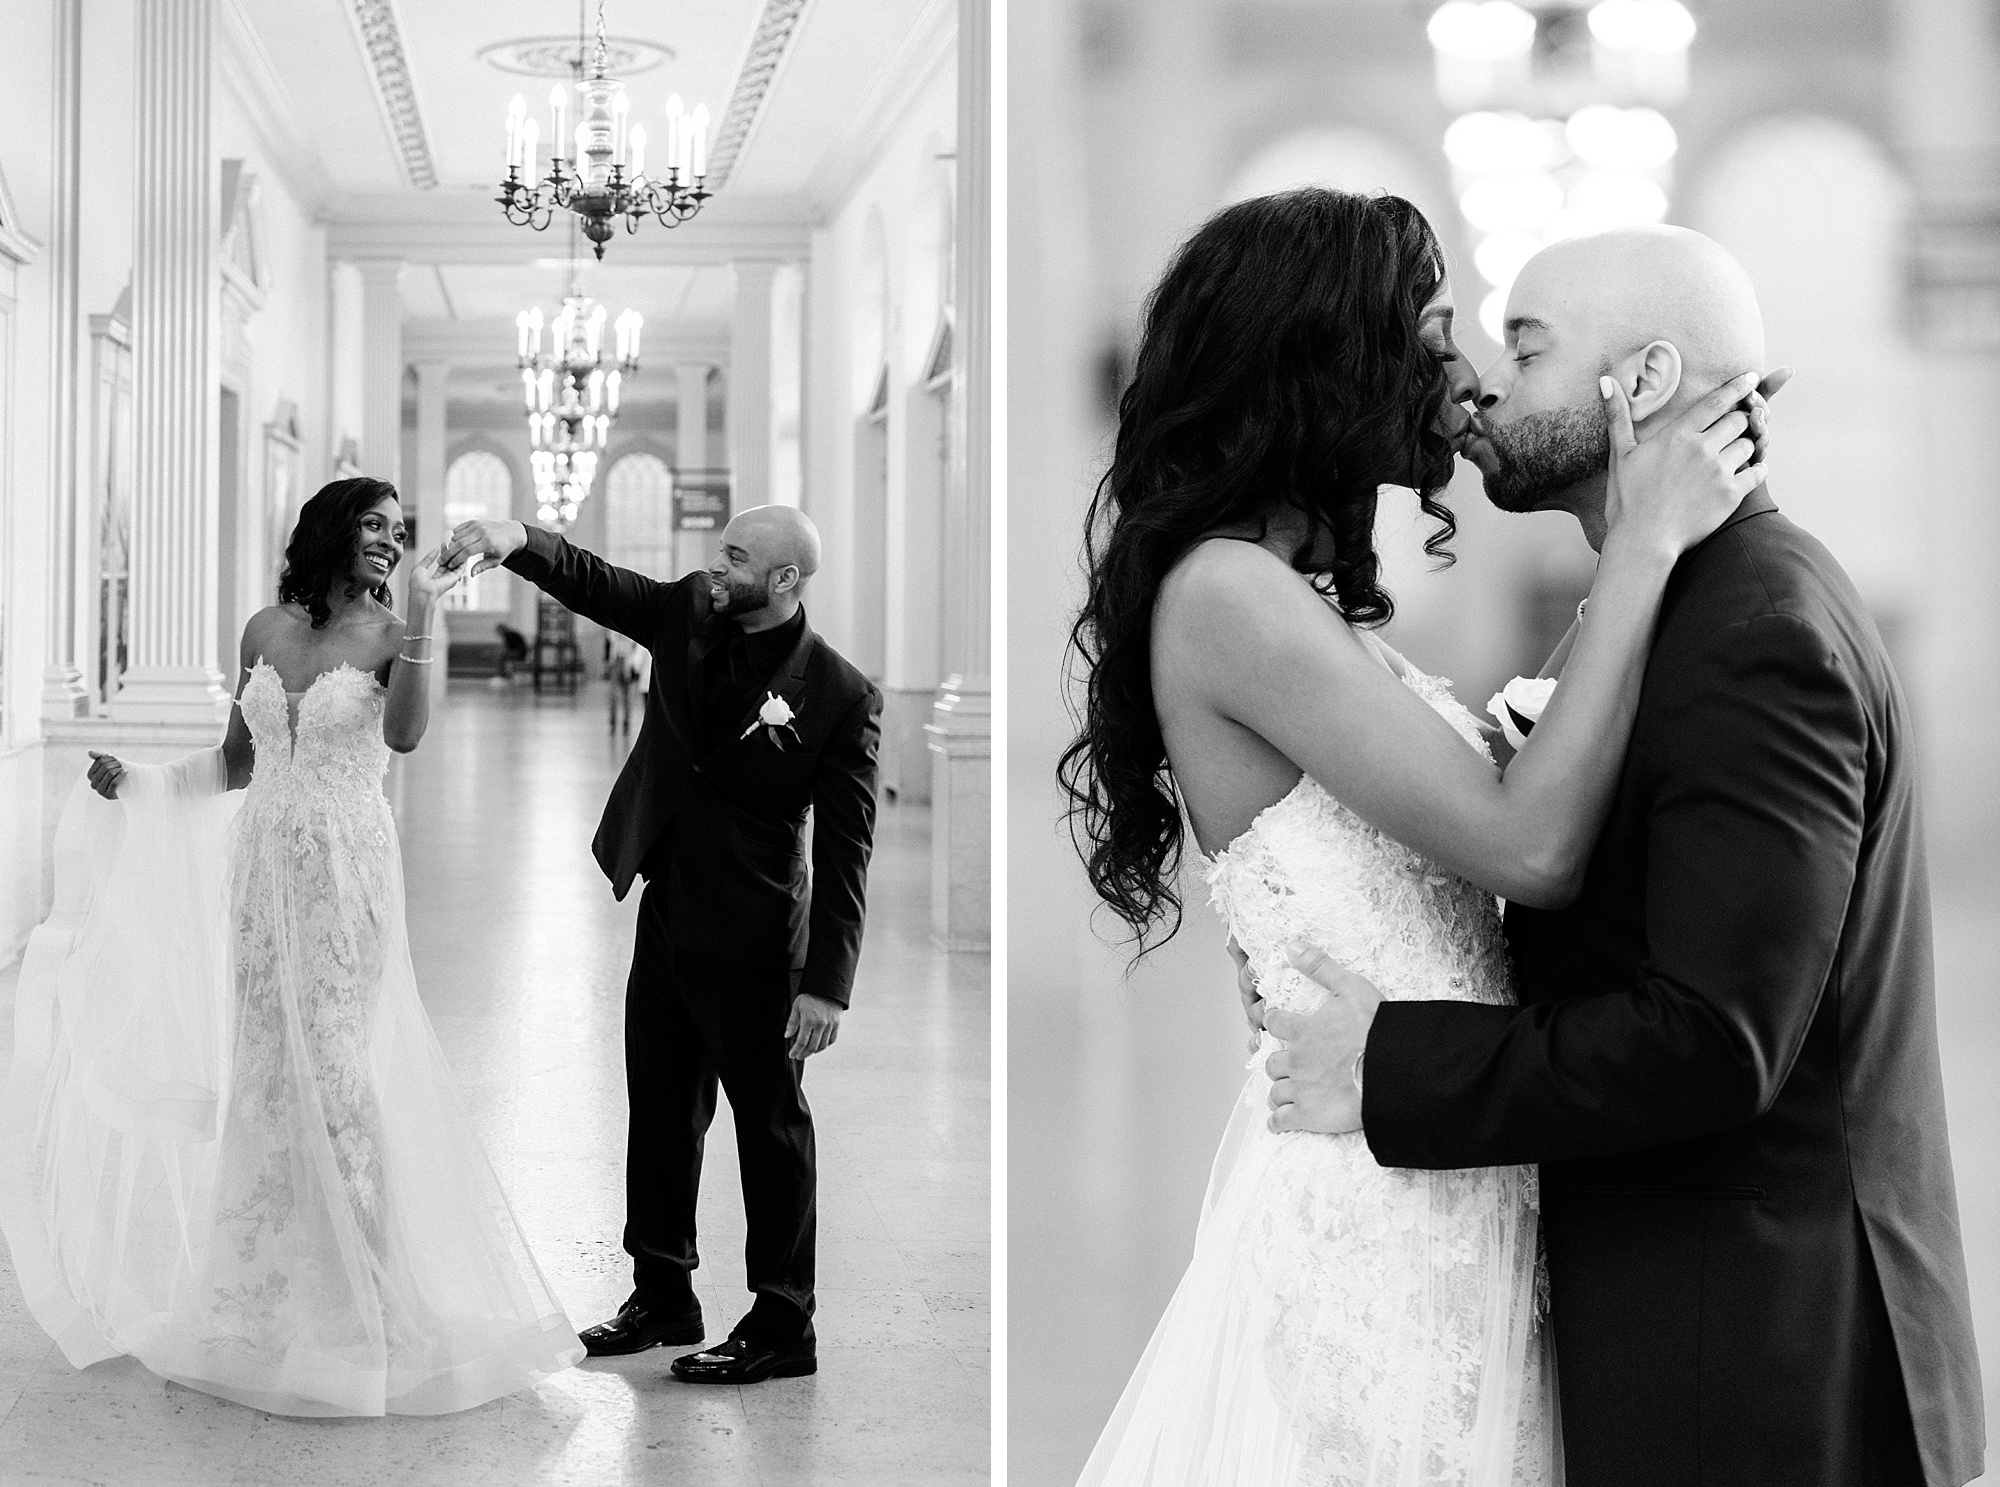 An elegant springtime Lovett Hall wedding at The Henry Ford filled with white and fuchsia orchids, roses, and touches of Greece by Breanne Rochelle Photography. 